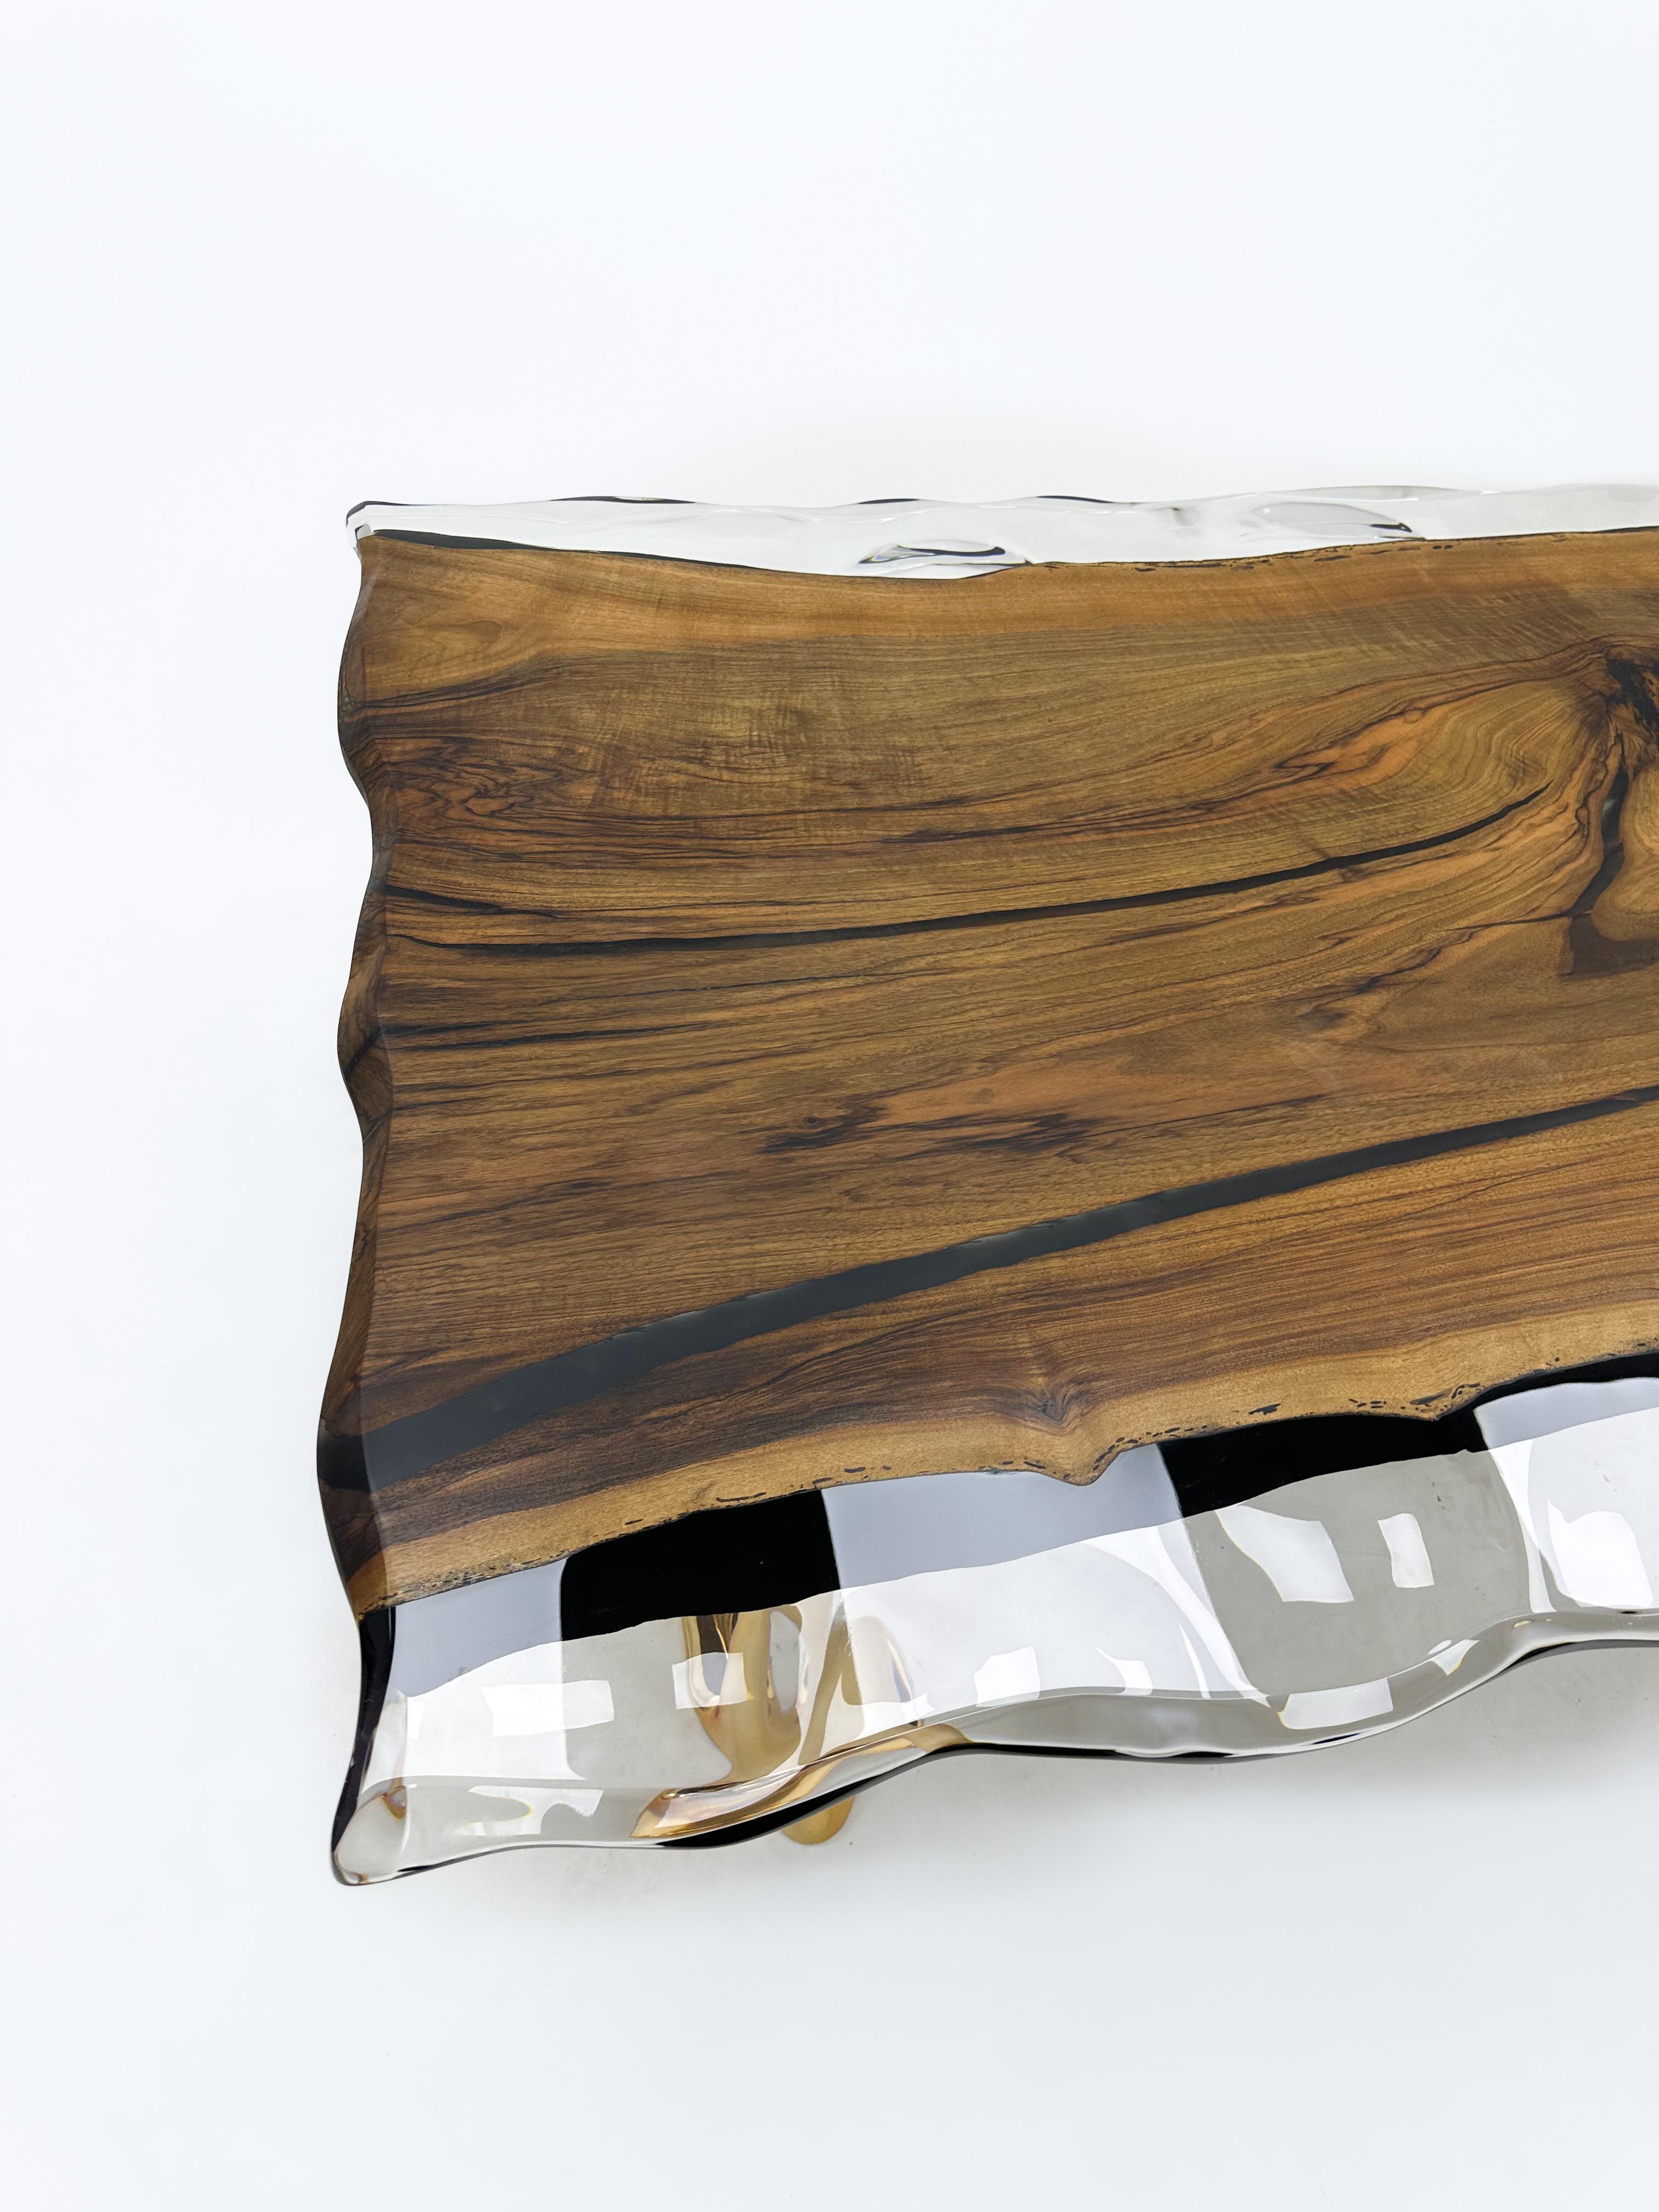 Clear Epoxy Resin Table 

Custom sizes & colours are available!

This table is made of walnut wood, selected for its unique character. What makes it special is the clear epoxy resin that beautifully covers the wood with its wave patterns, enhancing